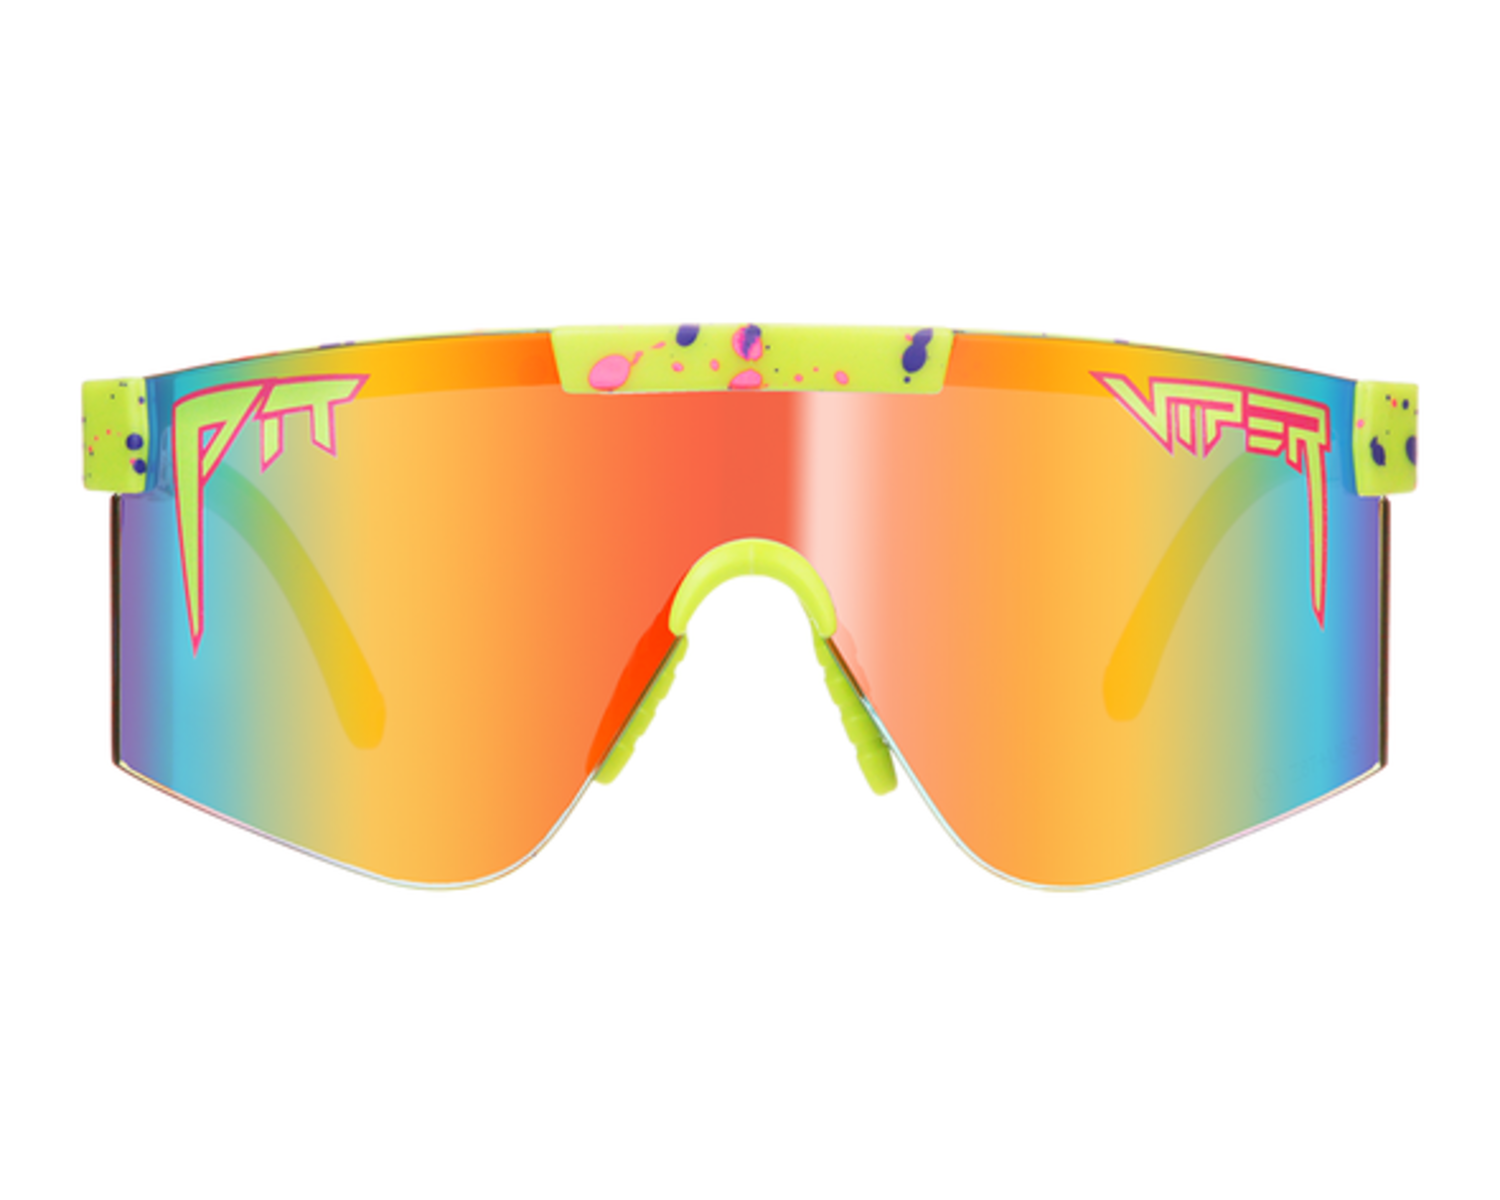 Pit Vipers - The 1993 2000's Sunglasses - Z87 Rated - Sully's Lifestyle